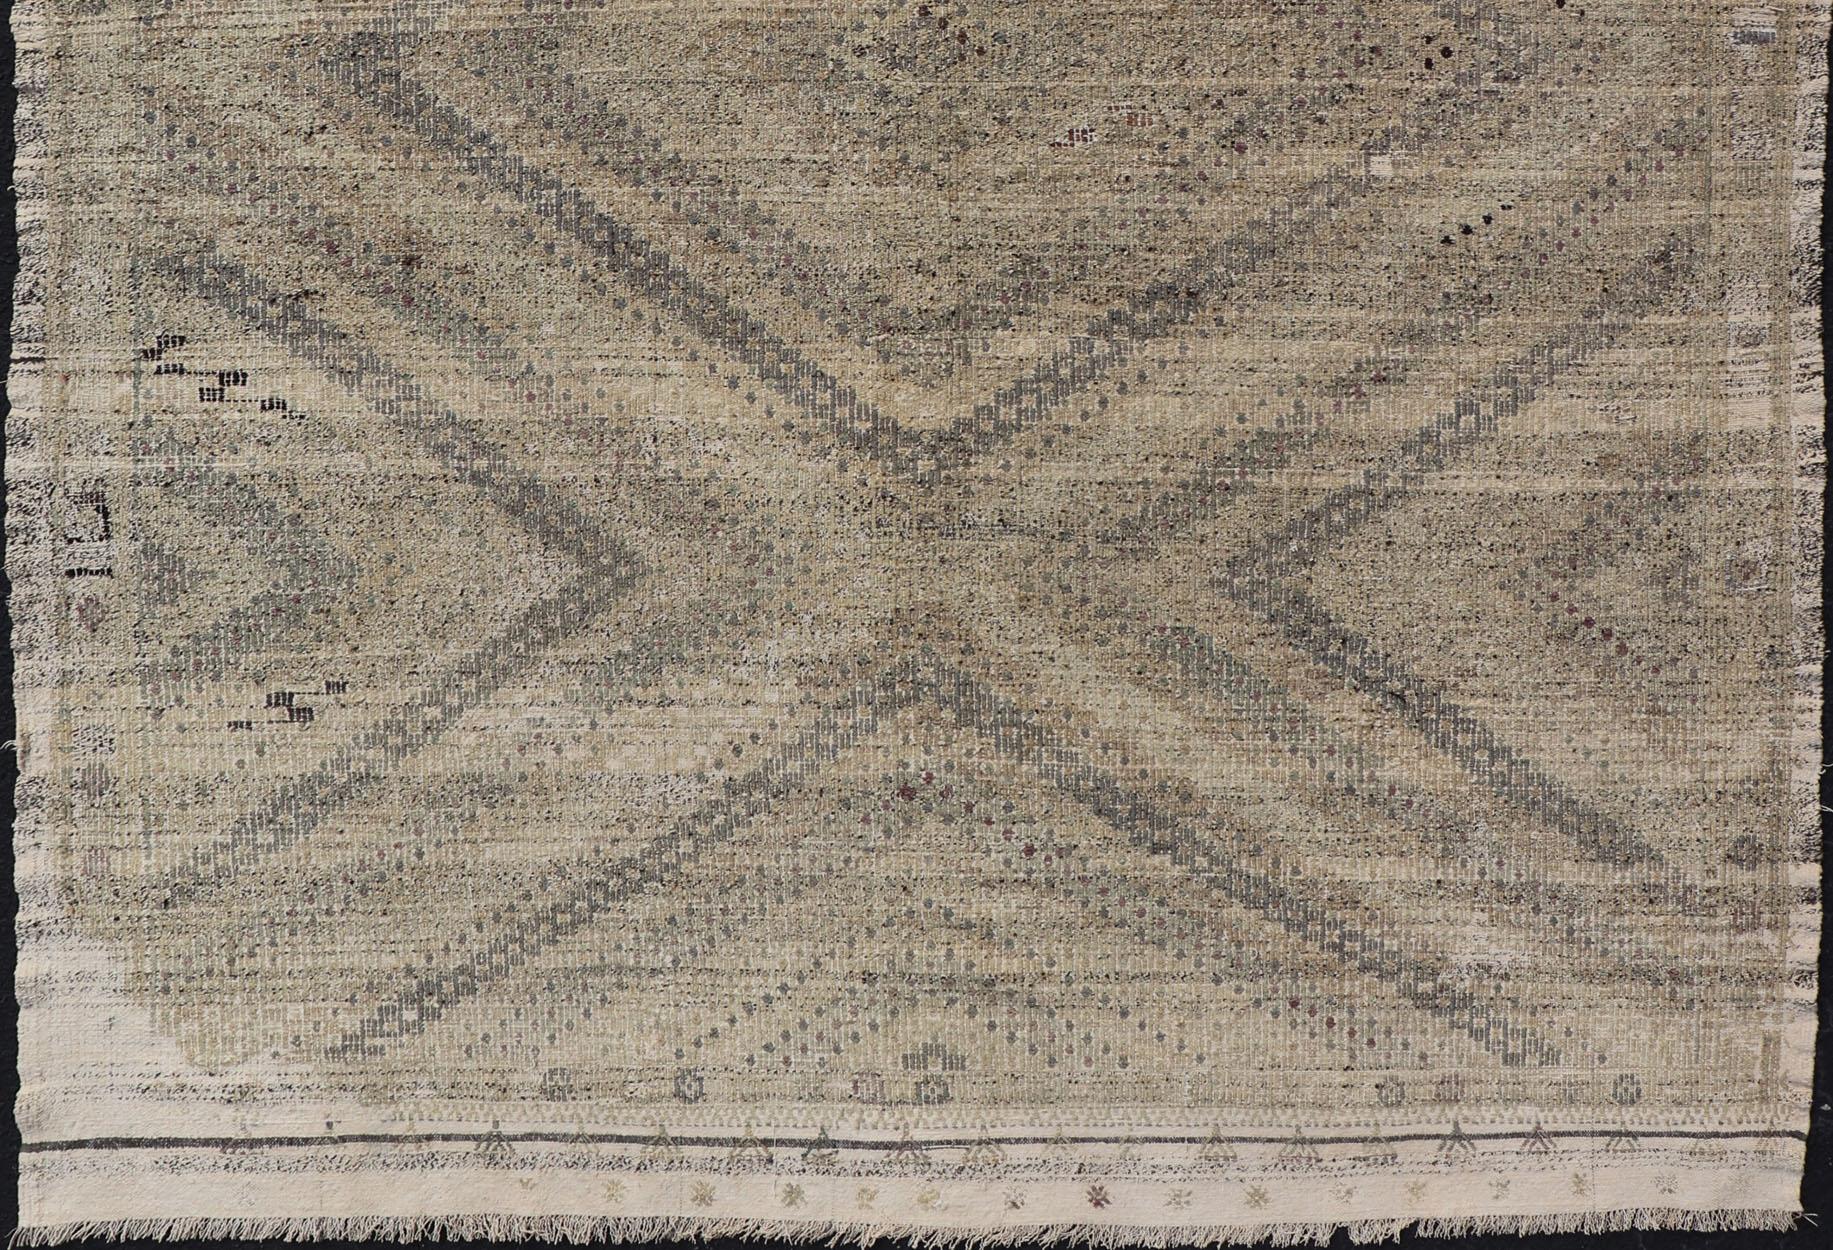 Hand-Woven Vintage Turkish Embroidered Flat-Weave Rug with Neutral-Toned Geometric Design For Sale